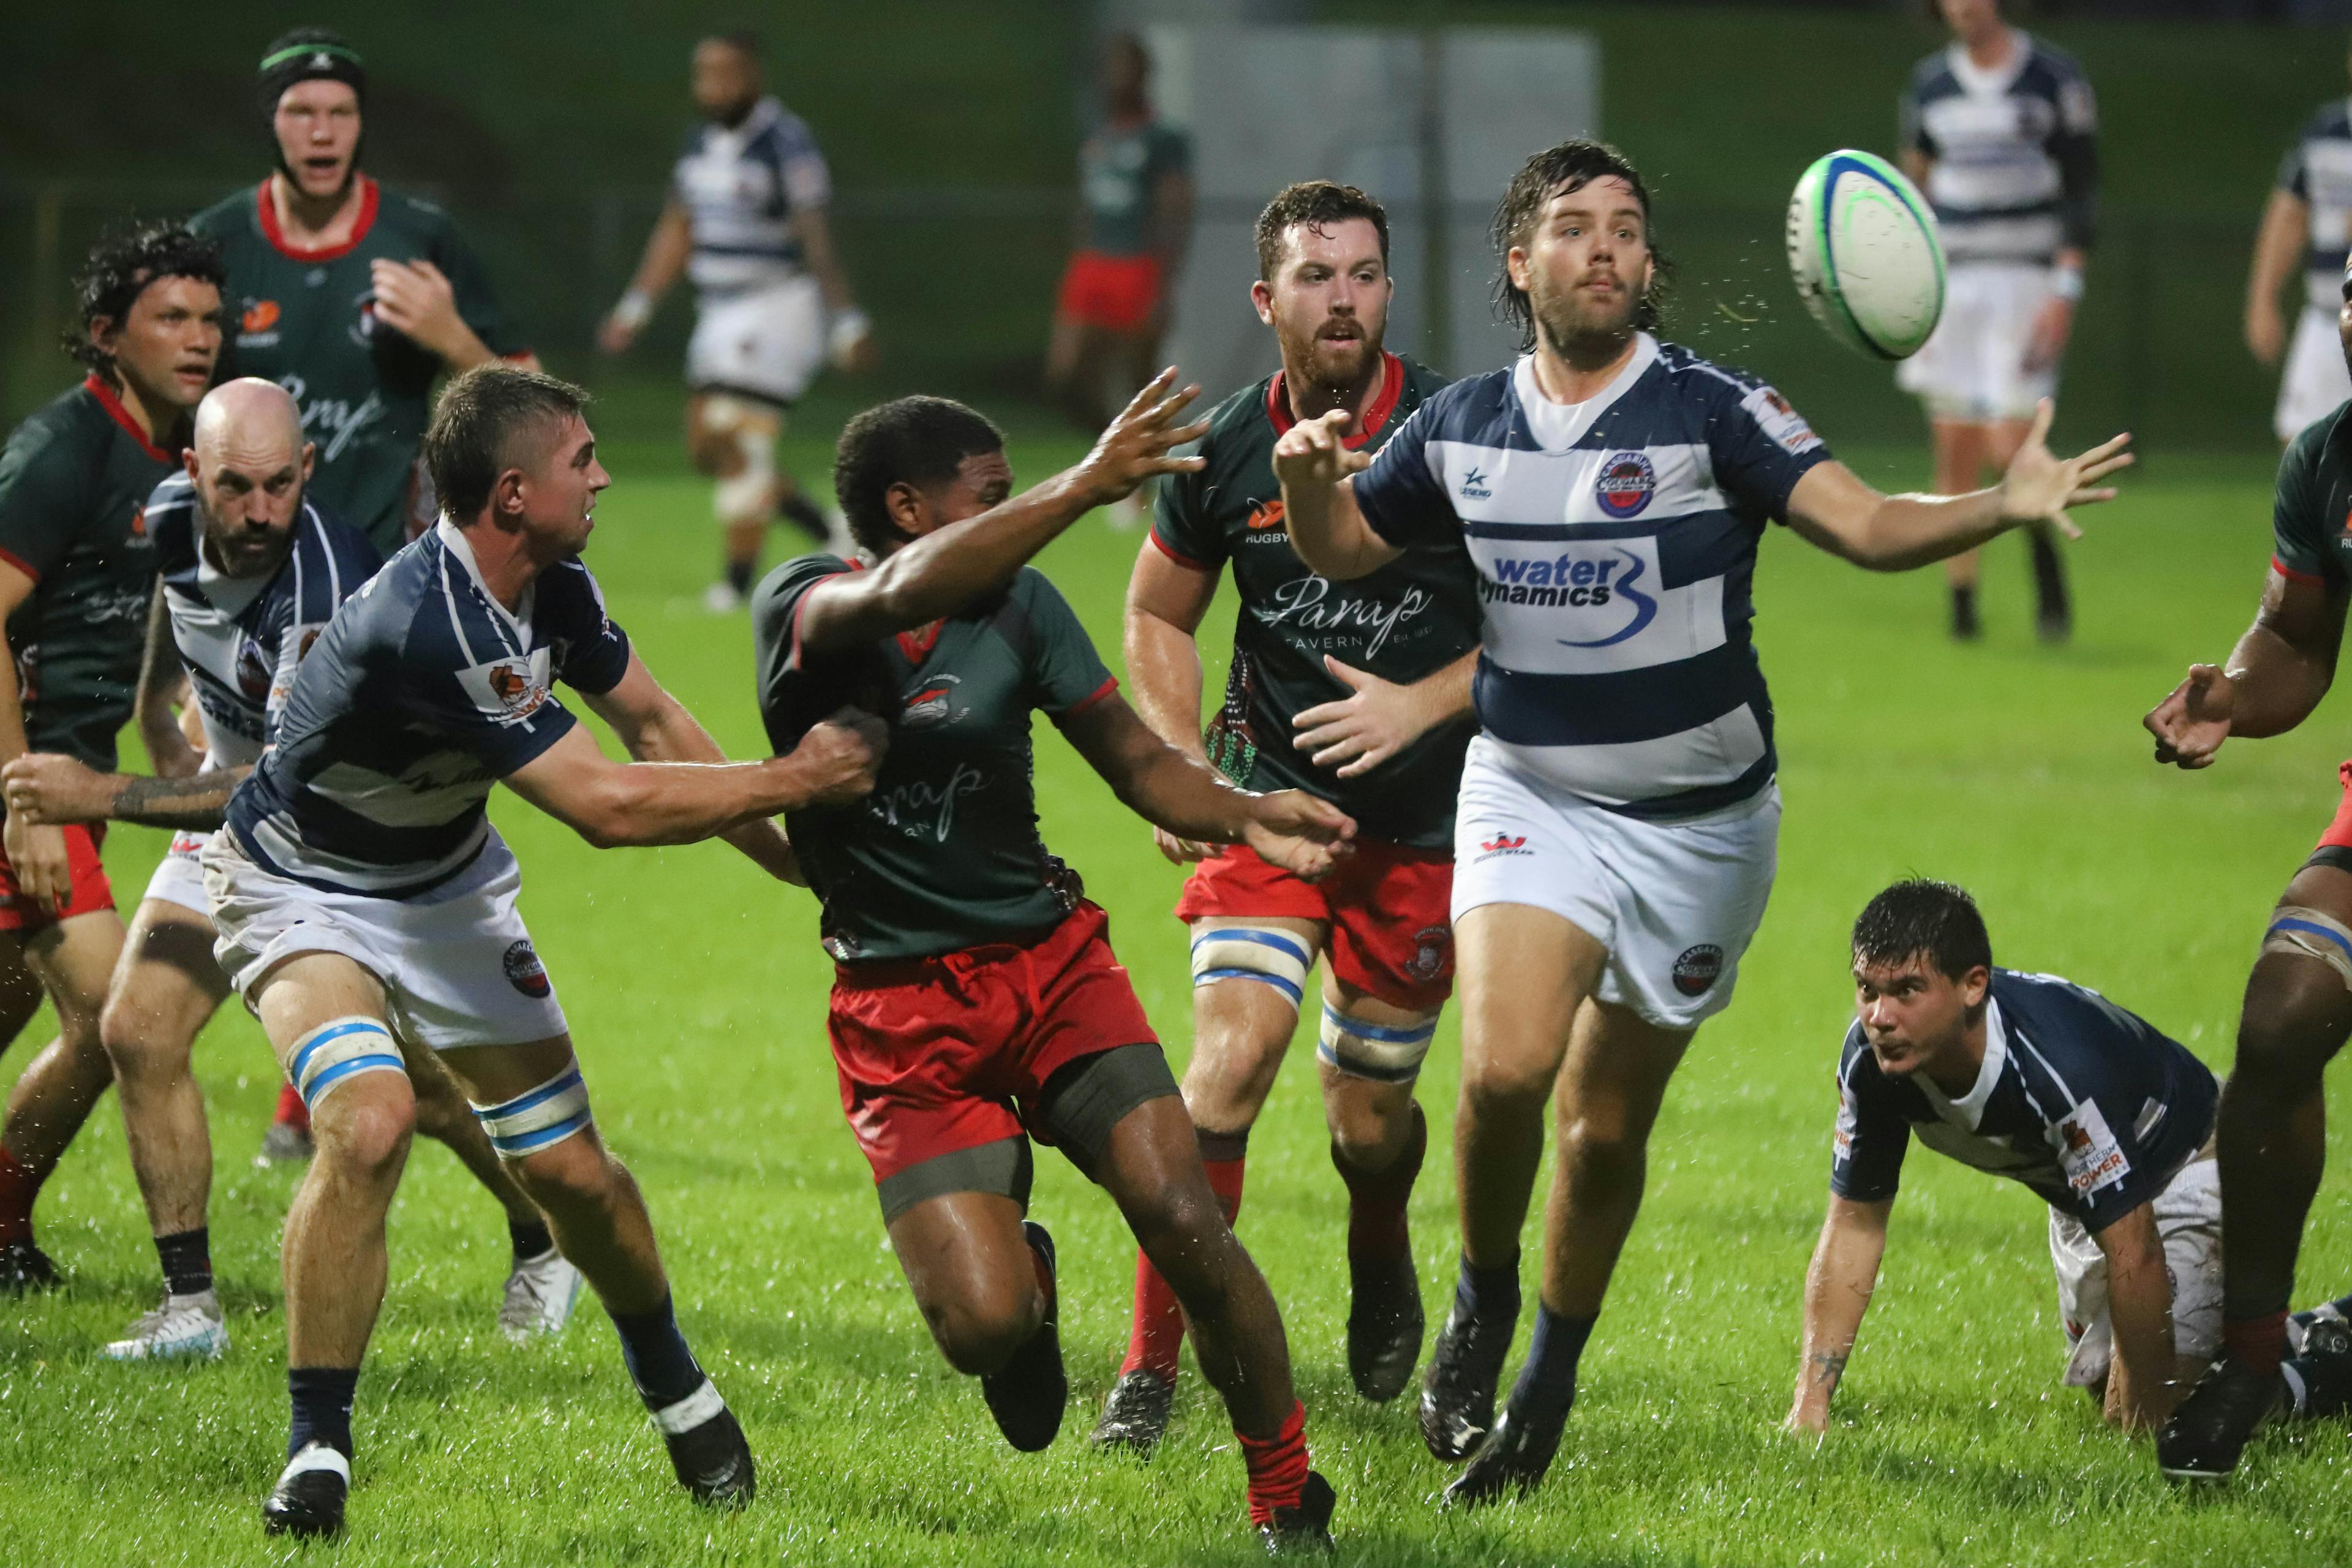 WILD NIGHT: South Darwin ended Casuarina's 11-game winning streak in their wet Round 15 encounter. Picture: Leithal Pictures